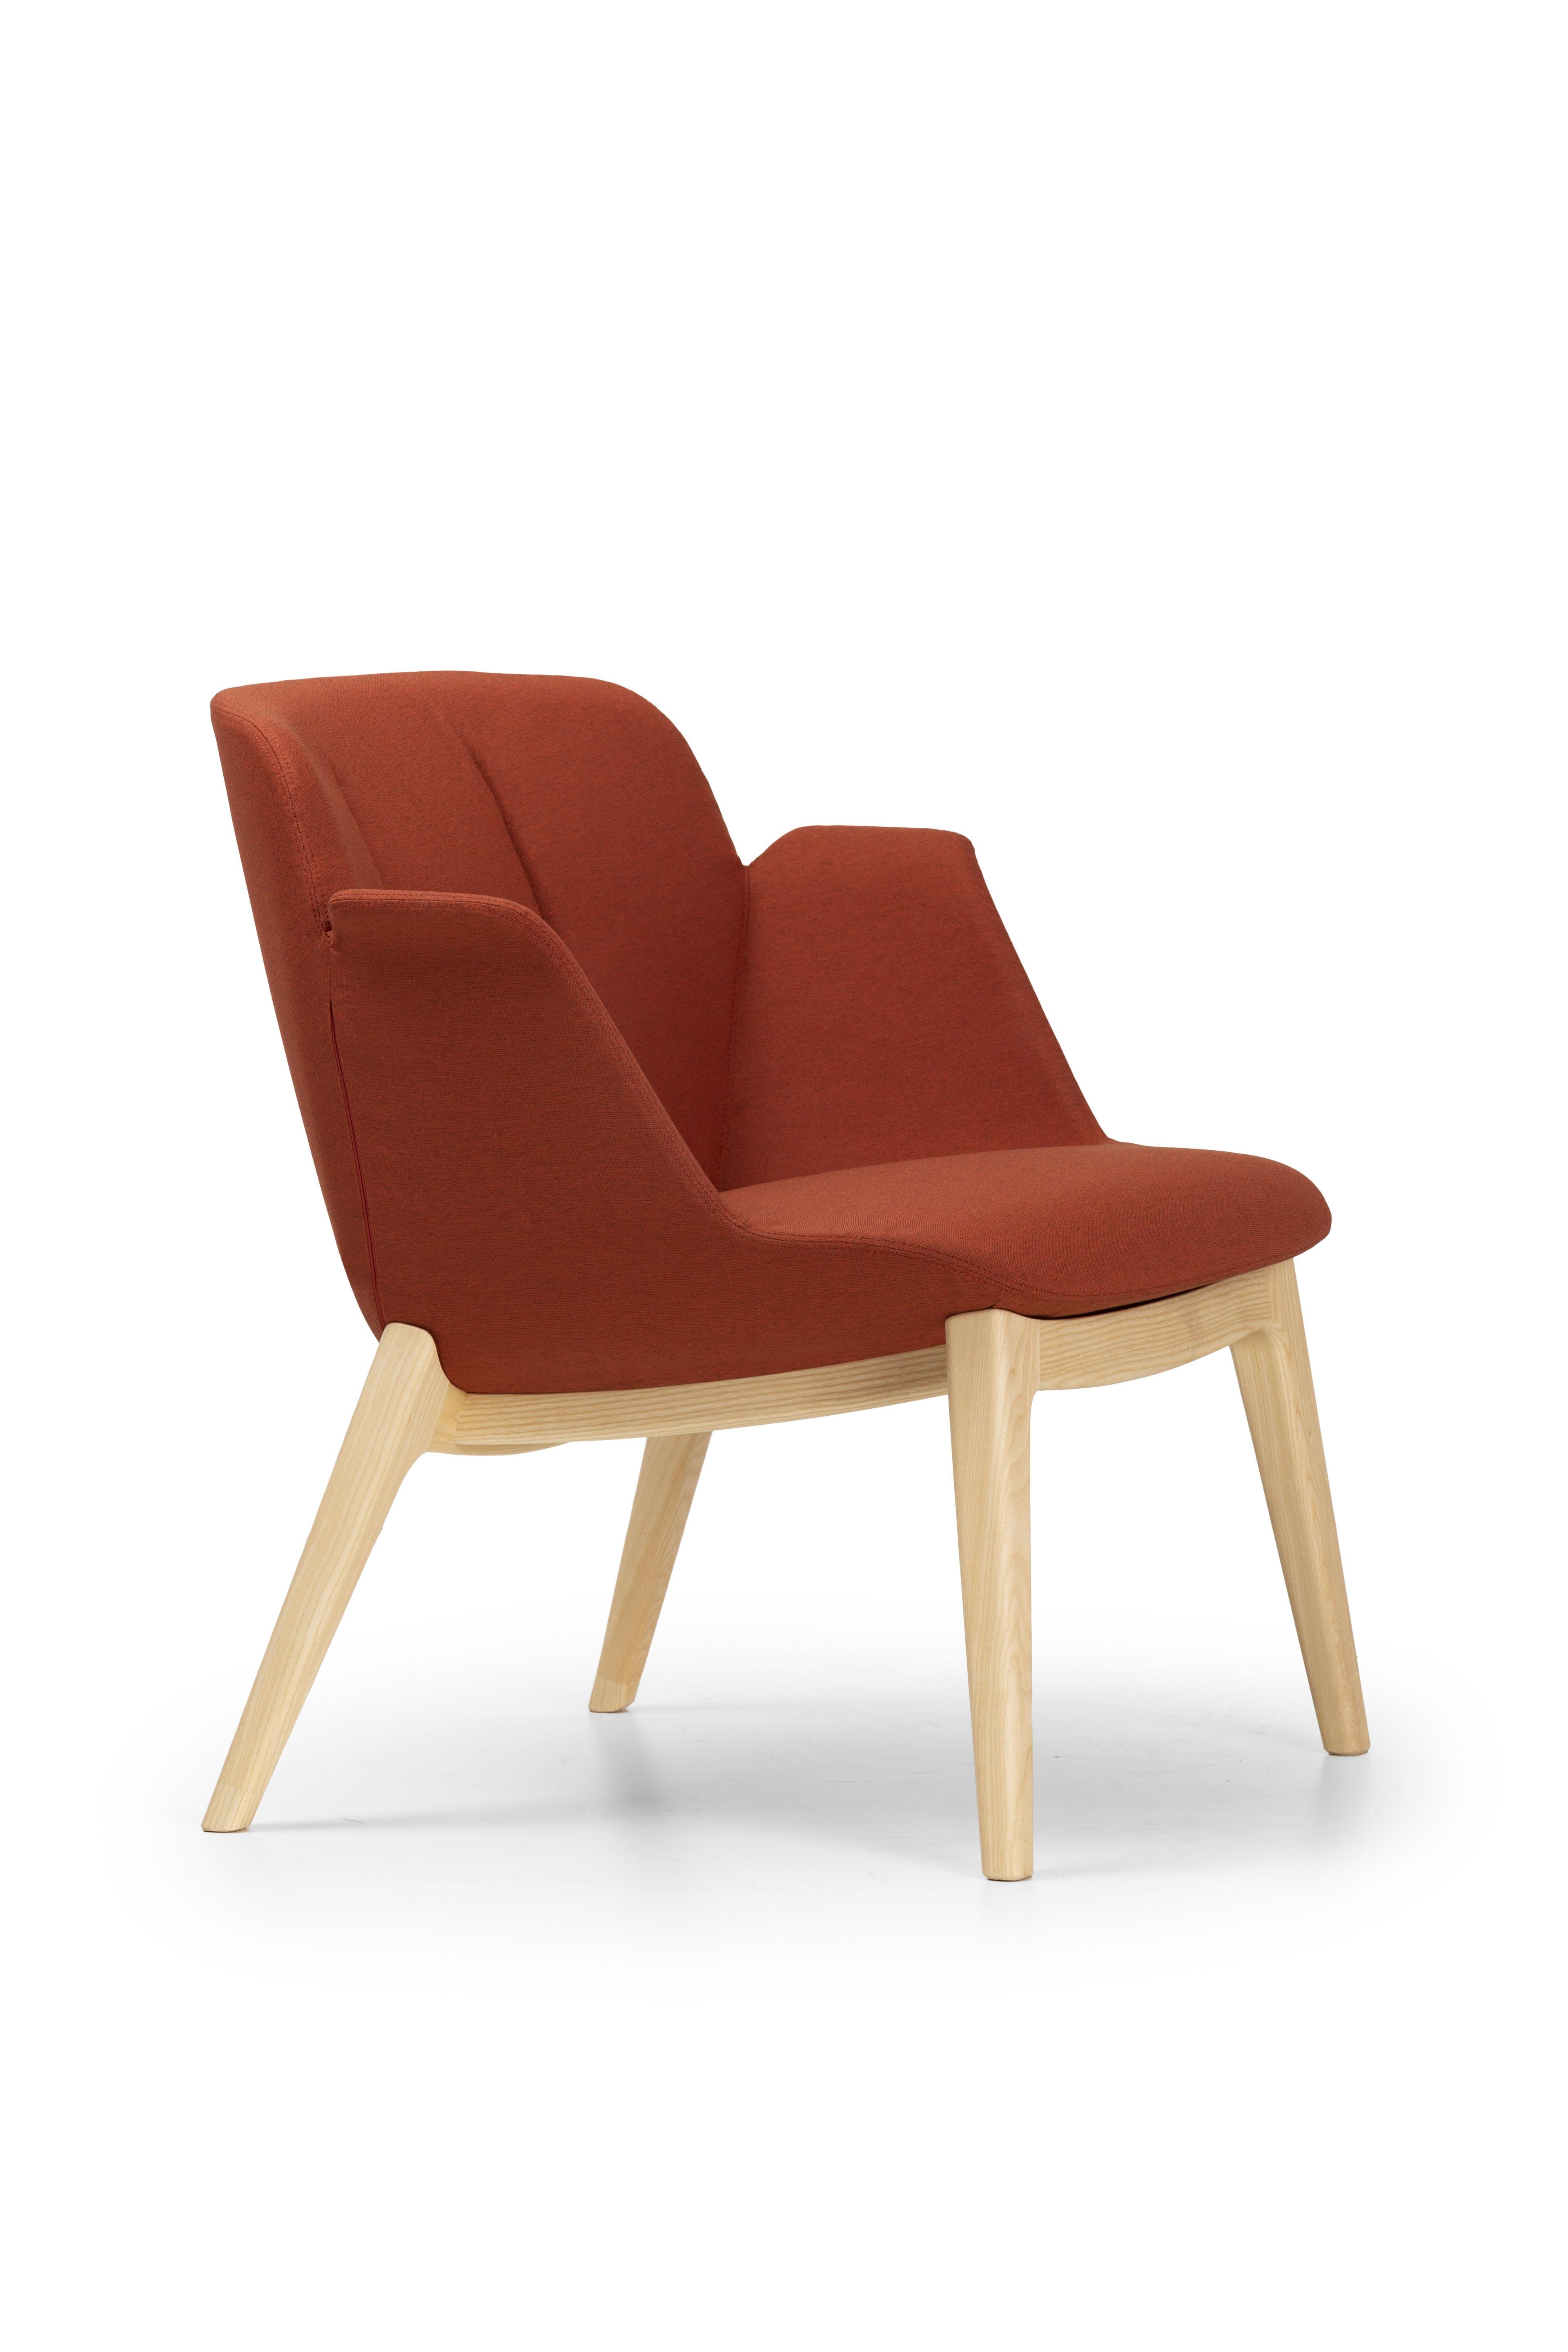 10 years after its debut in the market as an executive office chair and waiting armchair, Hive has been revisited and redesigned to adapt to the new needs of the lounge, waiting and hospitality segment. The new polyurethane shell is available in